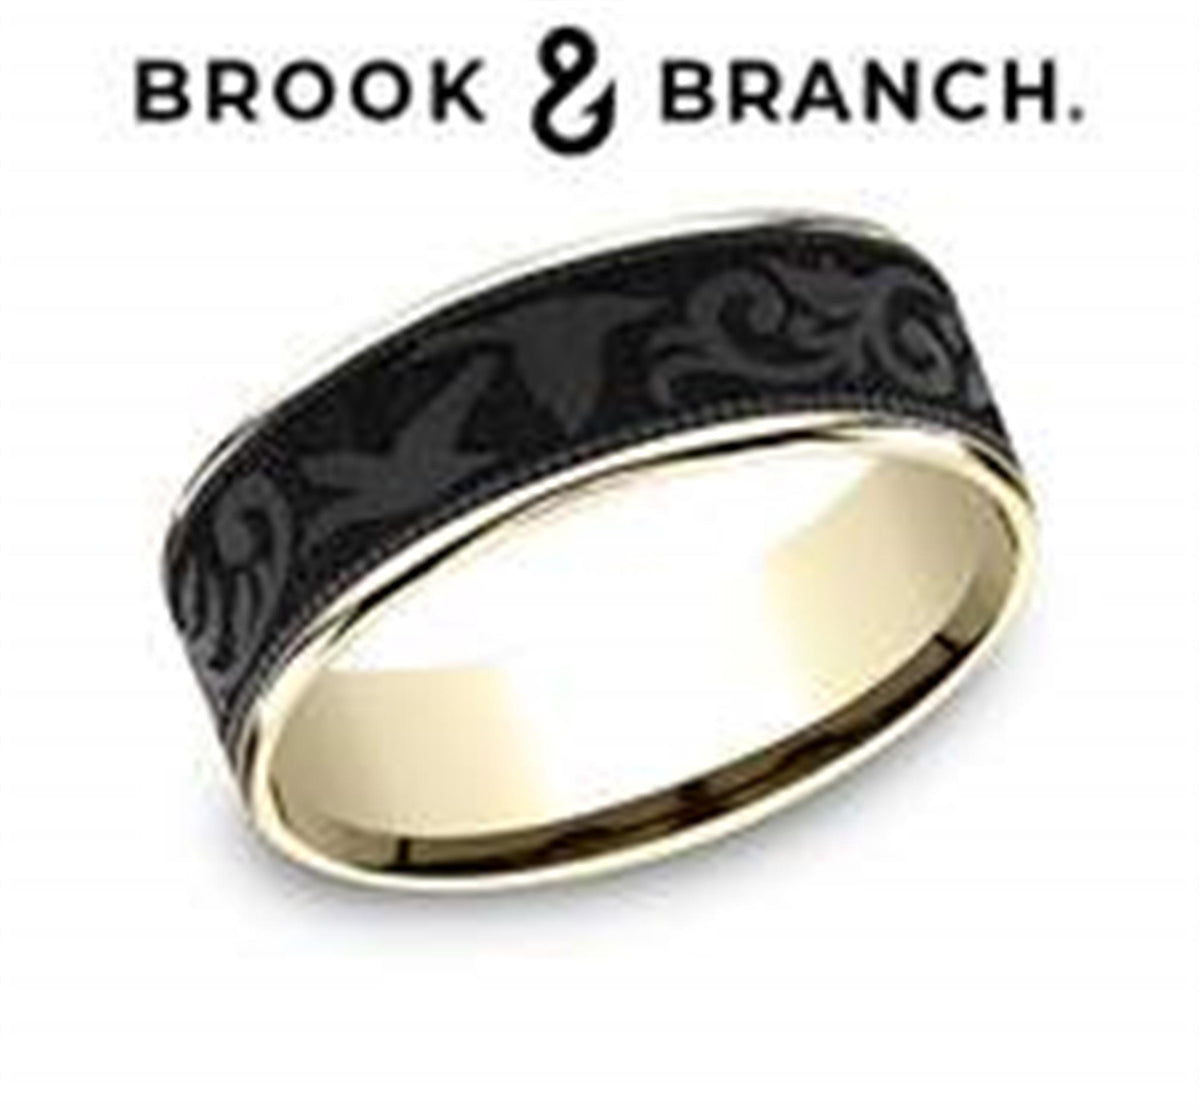 Brook & Branch 14Kt Yellow Gold And Black Titanium Band